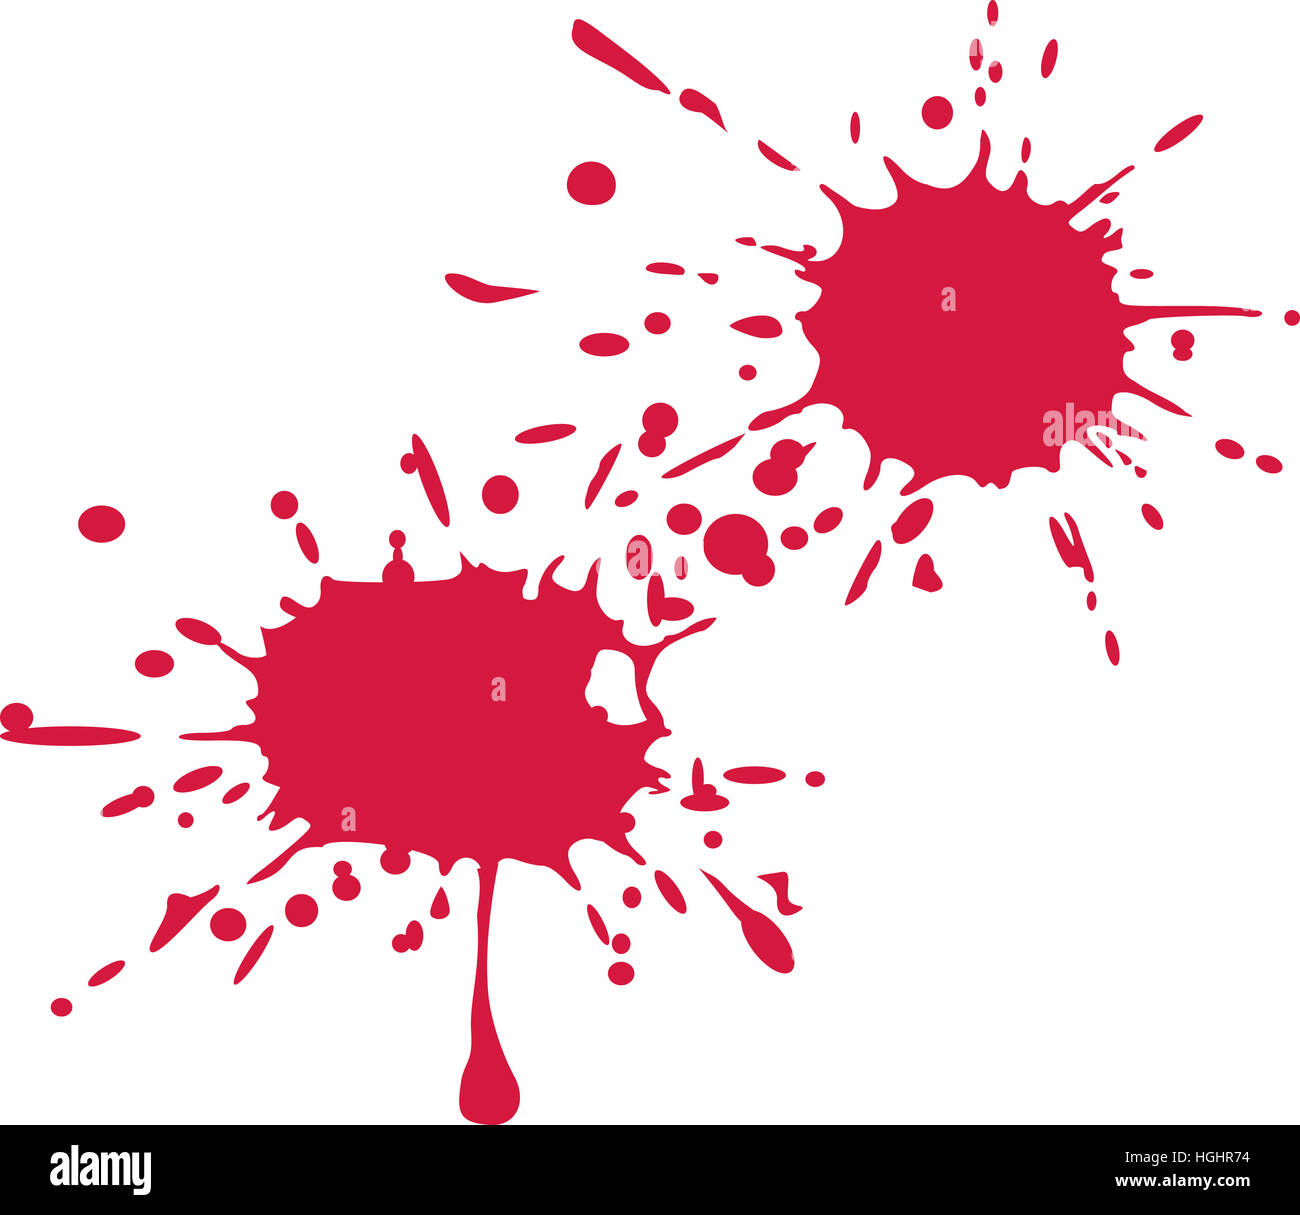 Blood splashes, drops and trail Stock Photo